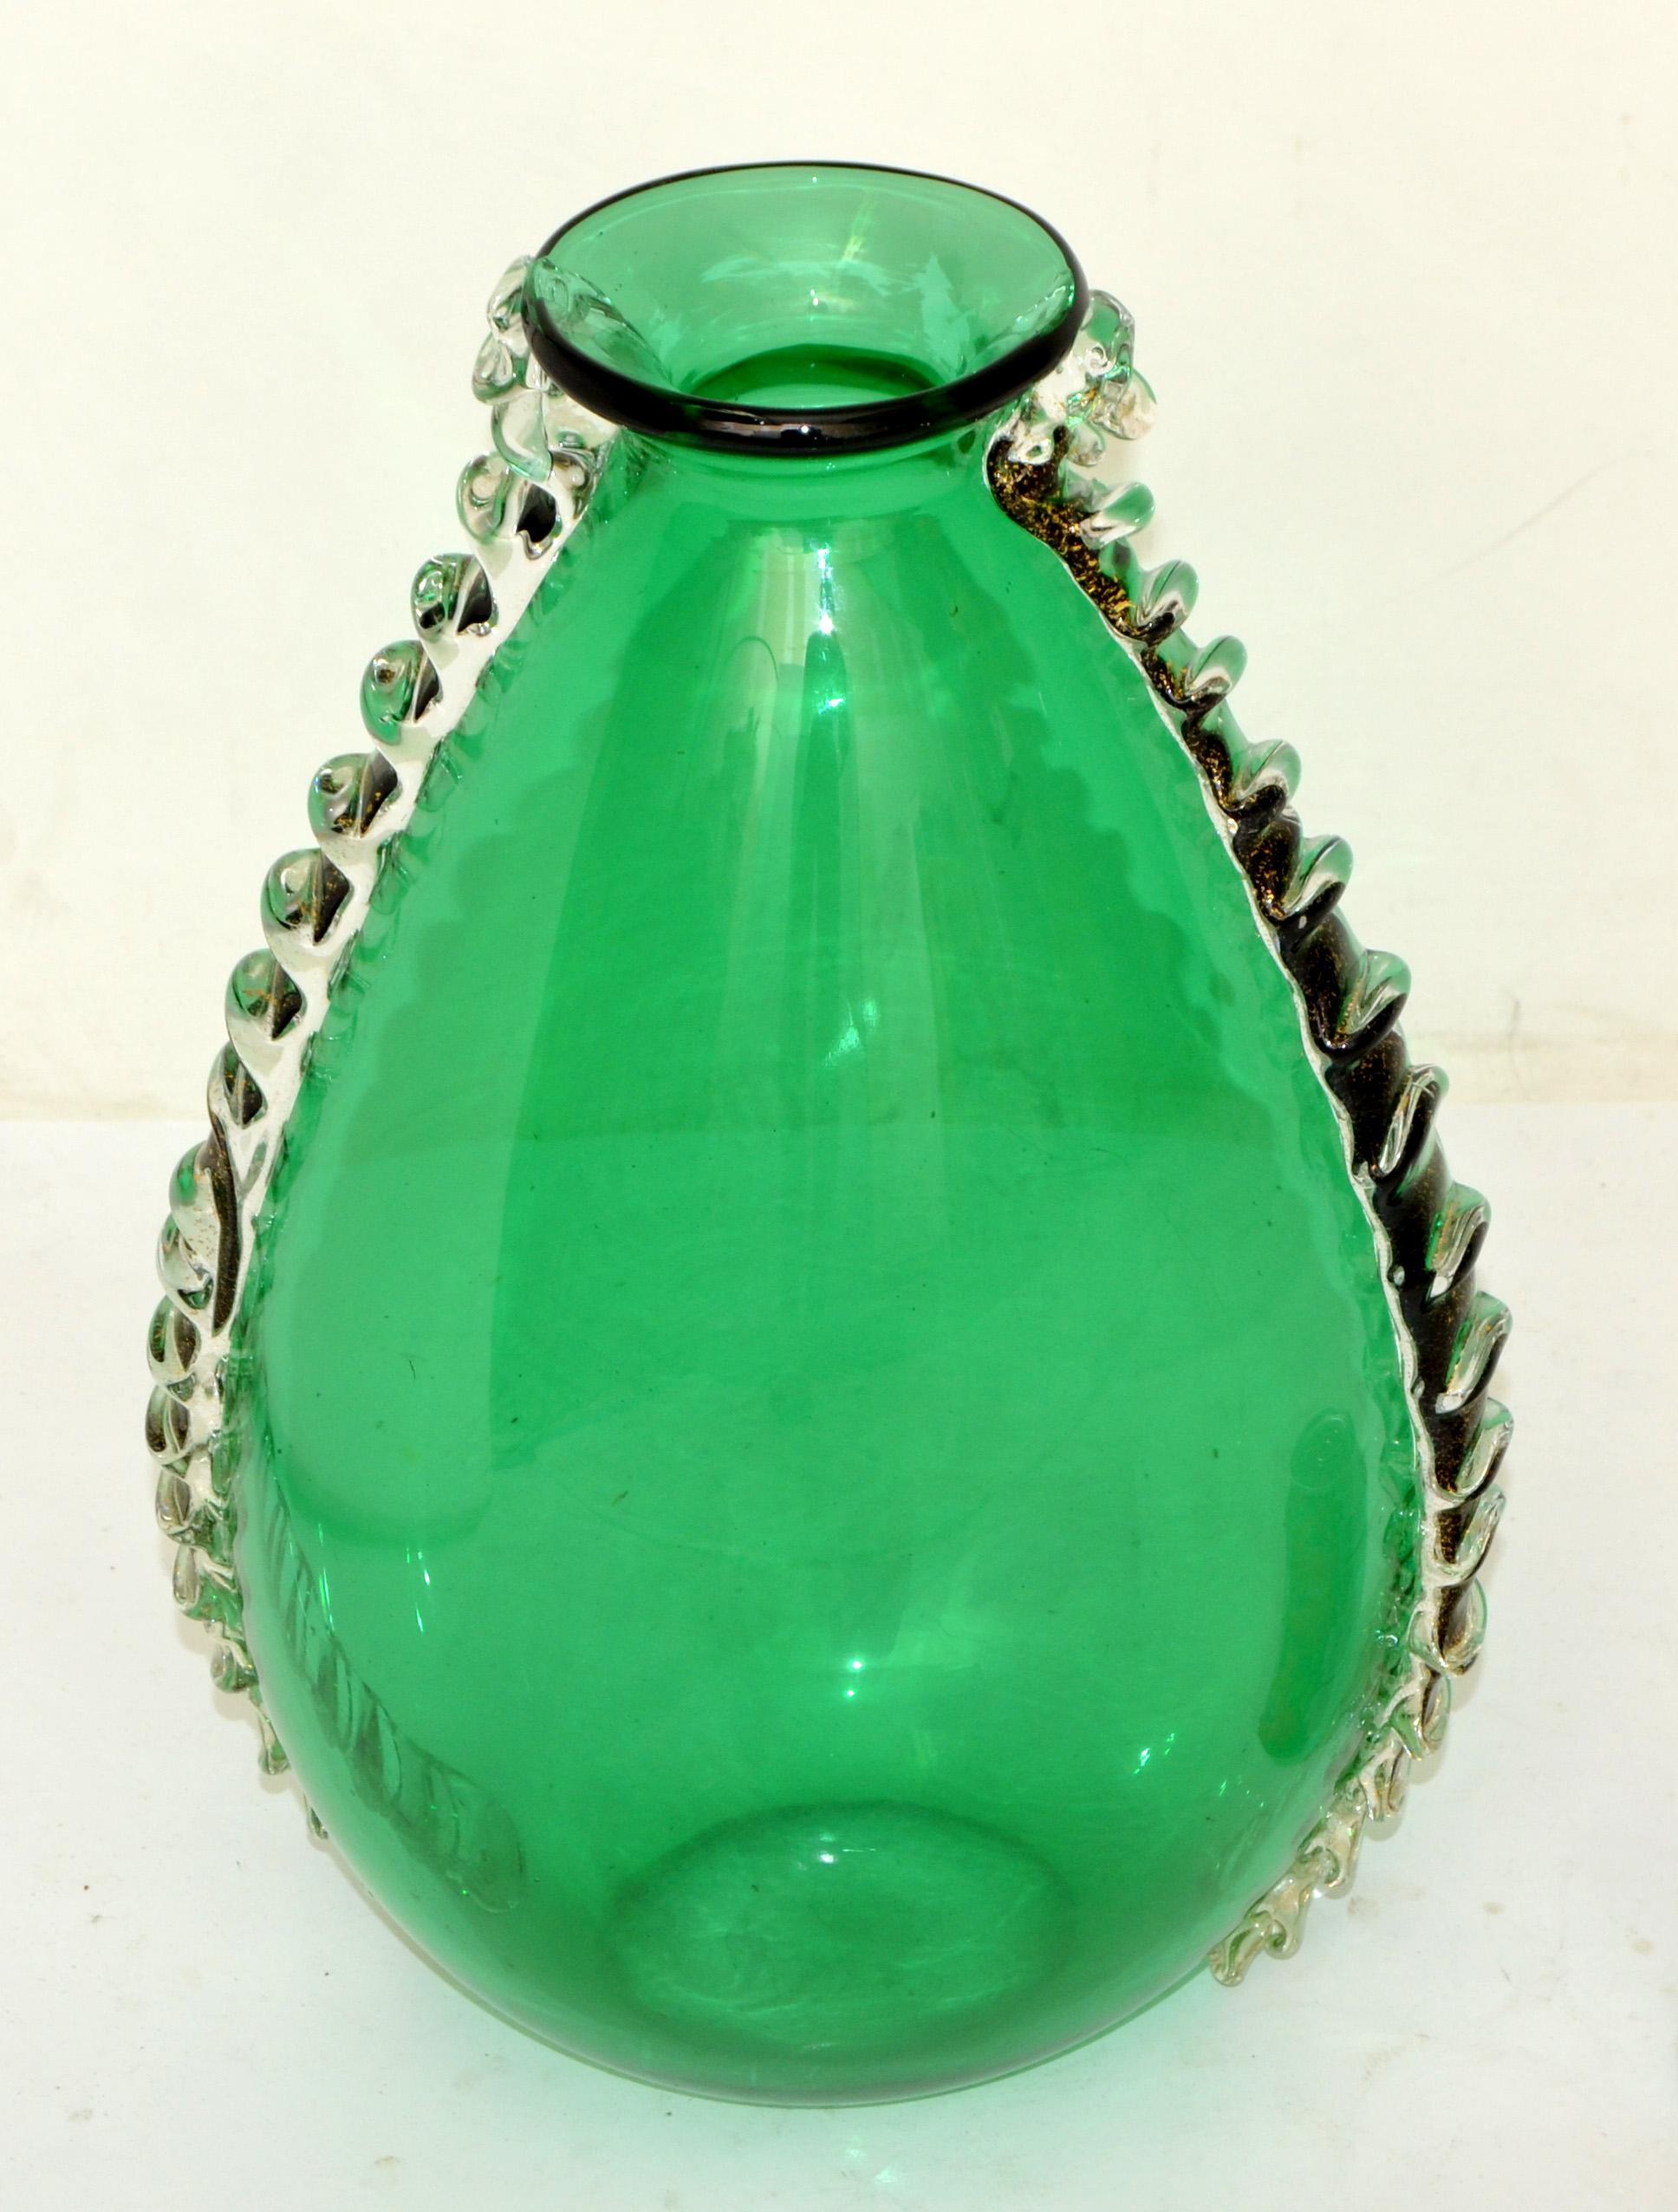 A true sample of mastery of glass art Mid-Century Modern made in Venice, Italy circa late 1970s. 
Styled after one of the finest glass blowers ever Pino Signoretto who worked with the top glass blowers in his early years.
Large green Blown Glass